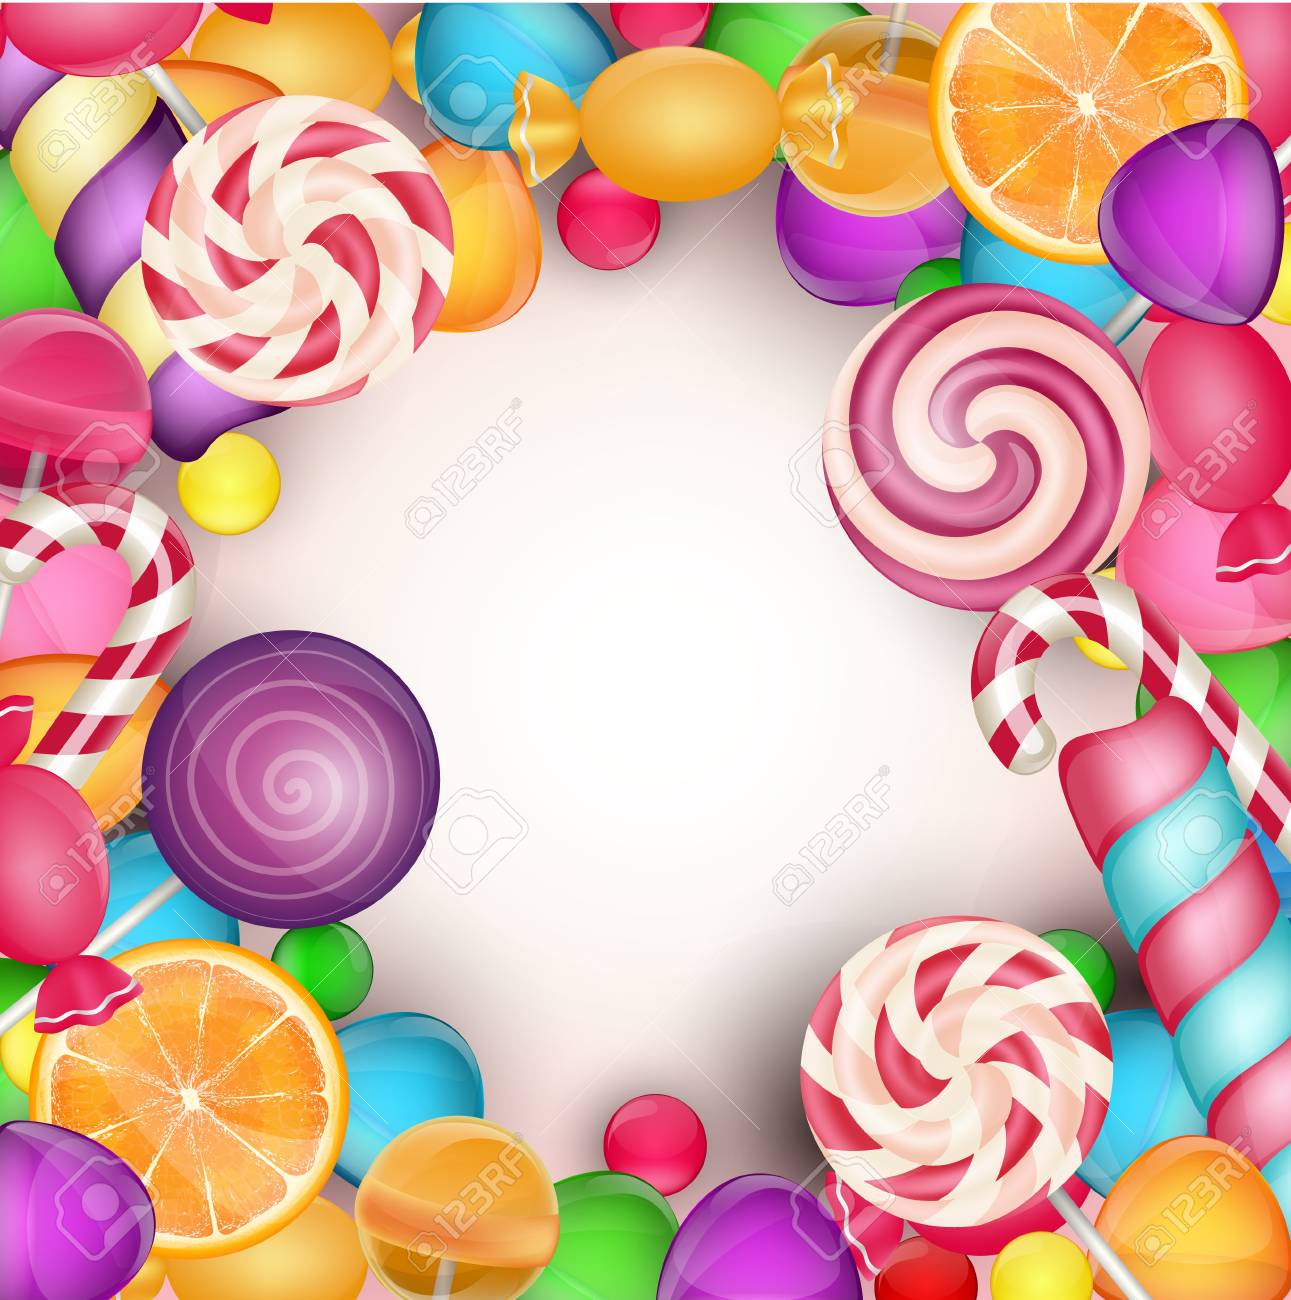 Colorful Candy Background Stock Photo Picture And Royalty Free